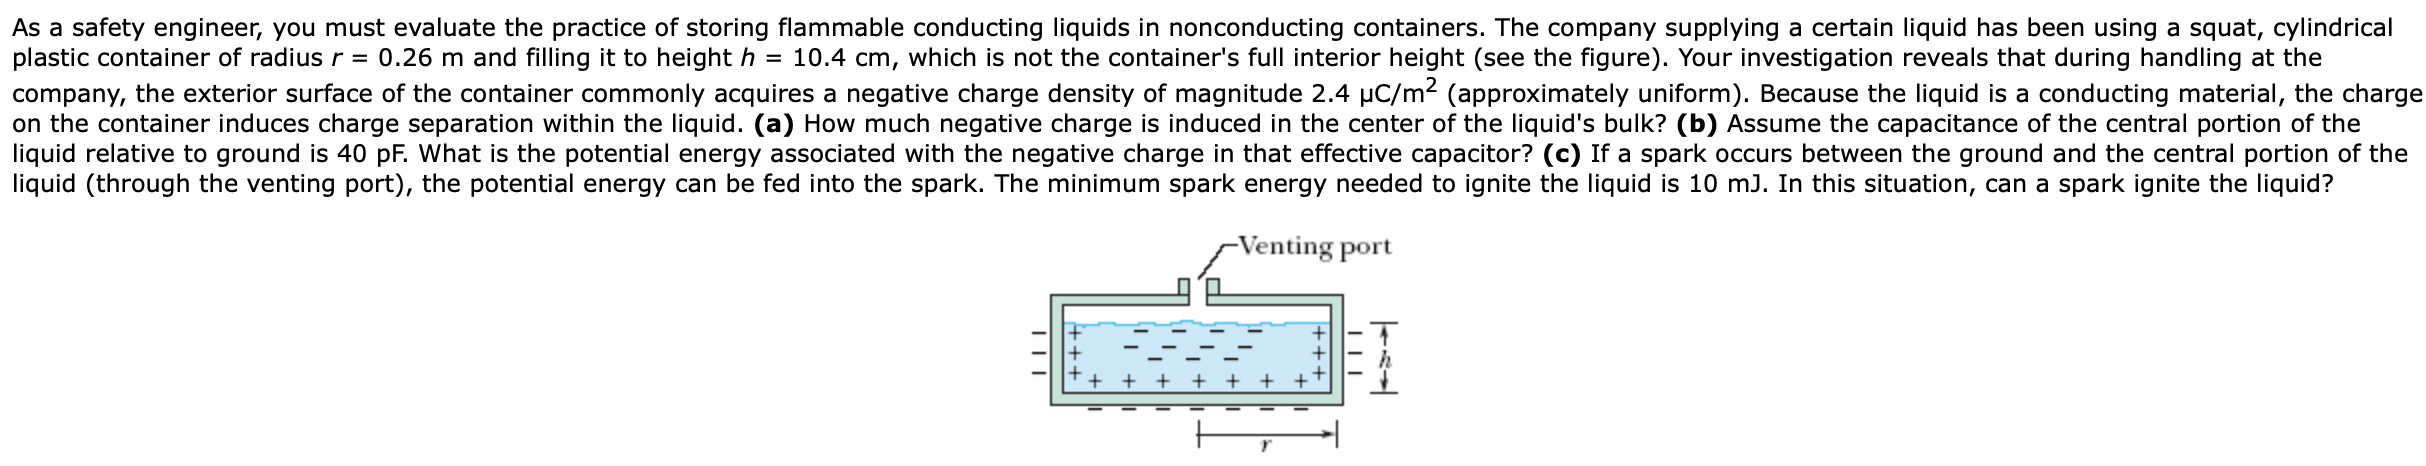 As a safety engineer, you must evaluate the practice of storing flammable conducting liquids in nonconducting containers. The company supplying a certain liquid has been using a squat, cylindrical
plastic container of radius r = 0.26 m and filling it to height h
company, the exterior surface of the container commonly acquires a negative charge density of magnitude 2.4 µC/m (approximately uniform). Because the liquid is a conducting material, the charge
on the container induces charge separation within the liquid. (a) How much negative charge is induced in the center of the liquid's bulk? (b) Assume the capacitance of the central portion of the
liquid relative to ground is 40 pF. What is the potential energy associated with the negative charge in that effective capacitor? (c) If a spark occurs between the ground and the central portion of the
liquid (through the venting port), the potential energy can be fed into the spark. The minimum spark energy needed to ignite the liquid is 10 mJ. In this situation, can a spark ignite the liquid?
10.4 cm, which is not the container's full interior height (see the figure). Your investigation reveals that during handling at the
-Venting port
